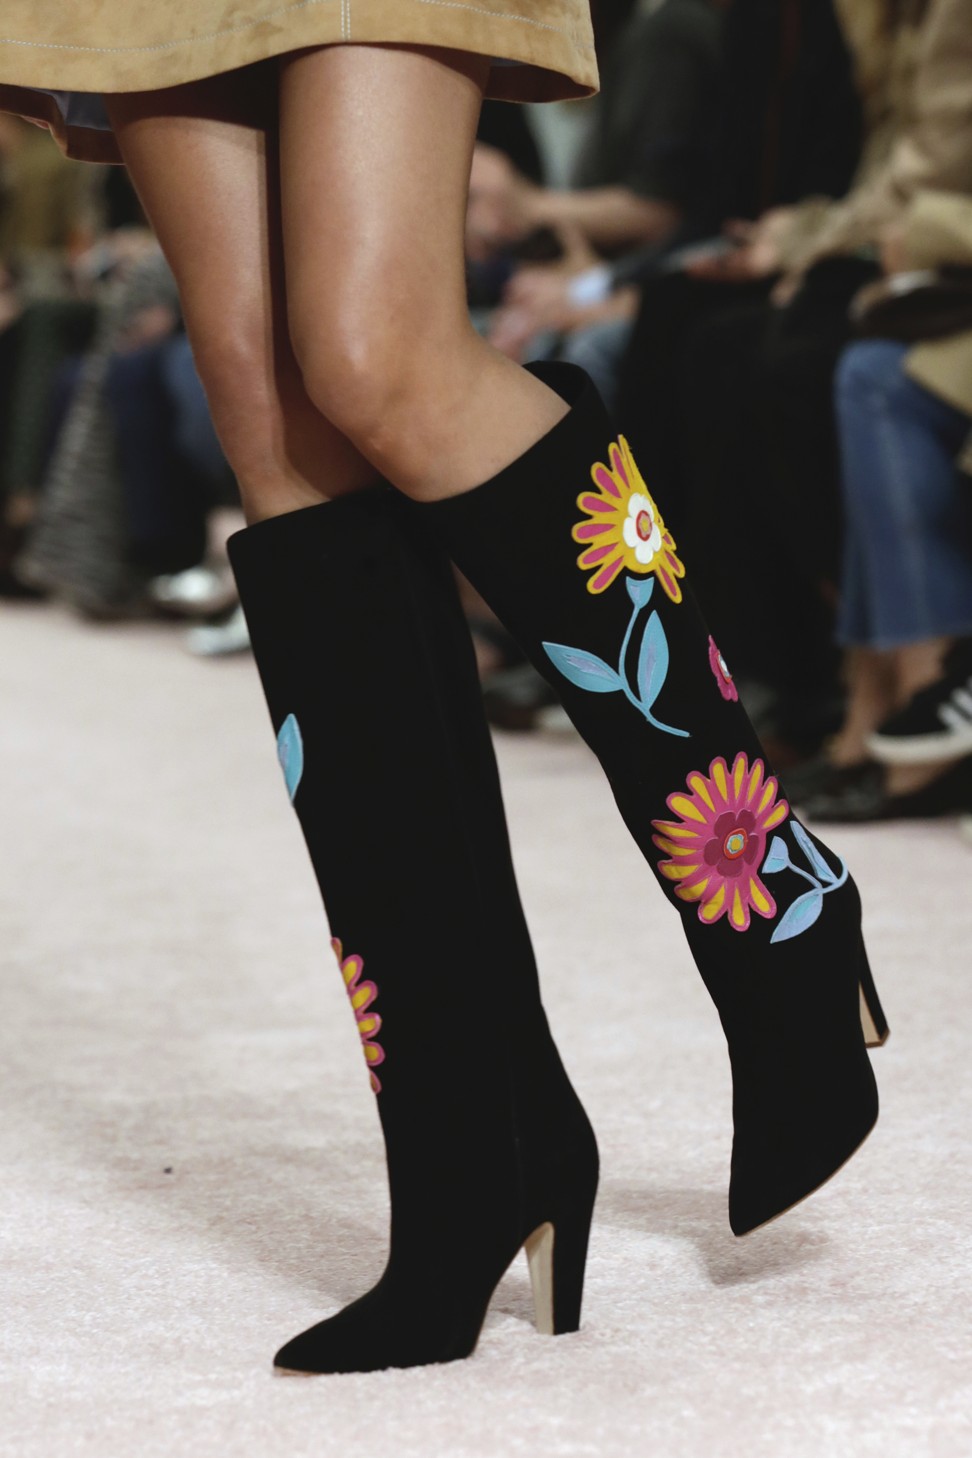 Floral-patterned boots from Carolina Herrera’s spring-summer 2019 collection are modelled on the catwalk during the brand’s show on Monday at New York Fashion Week. Photo: AP